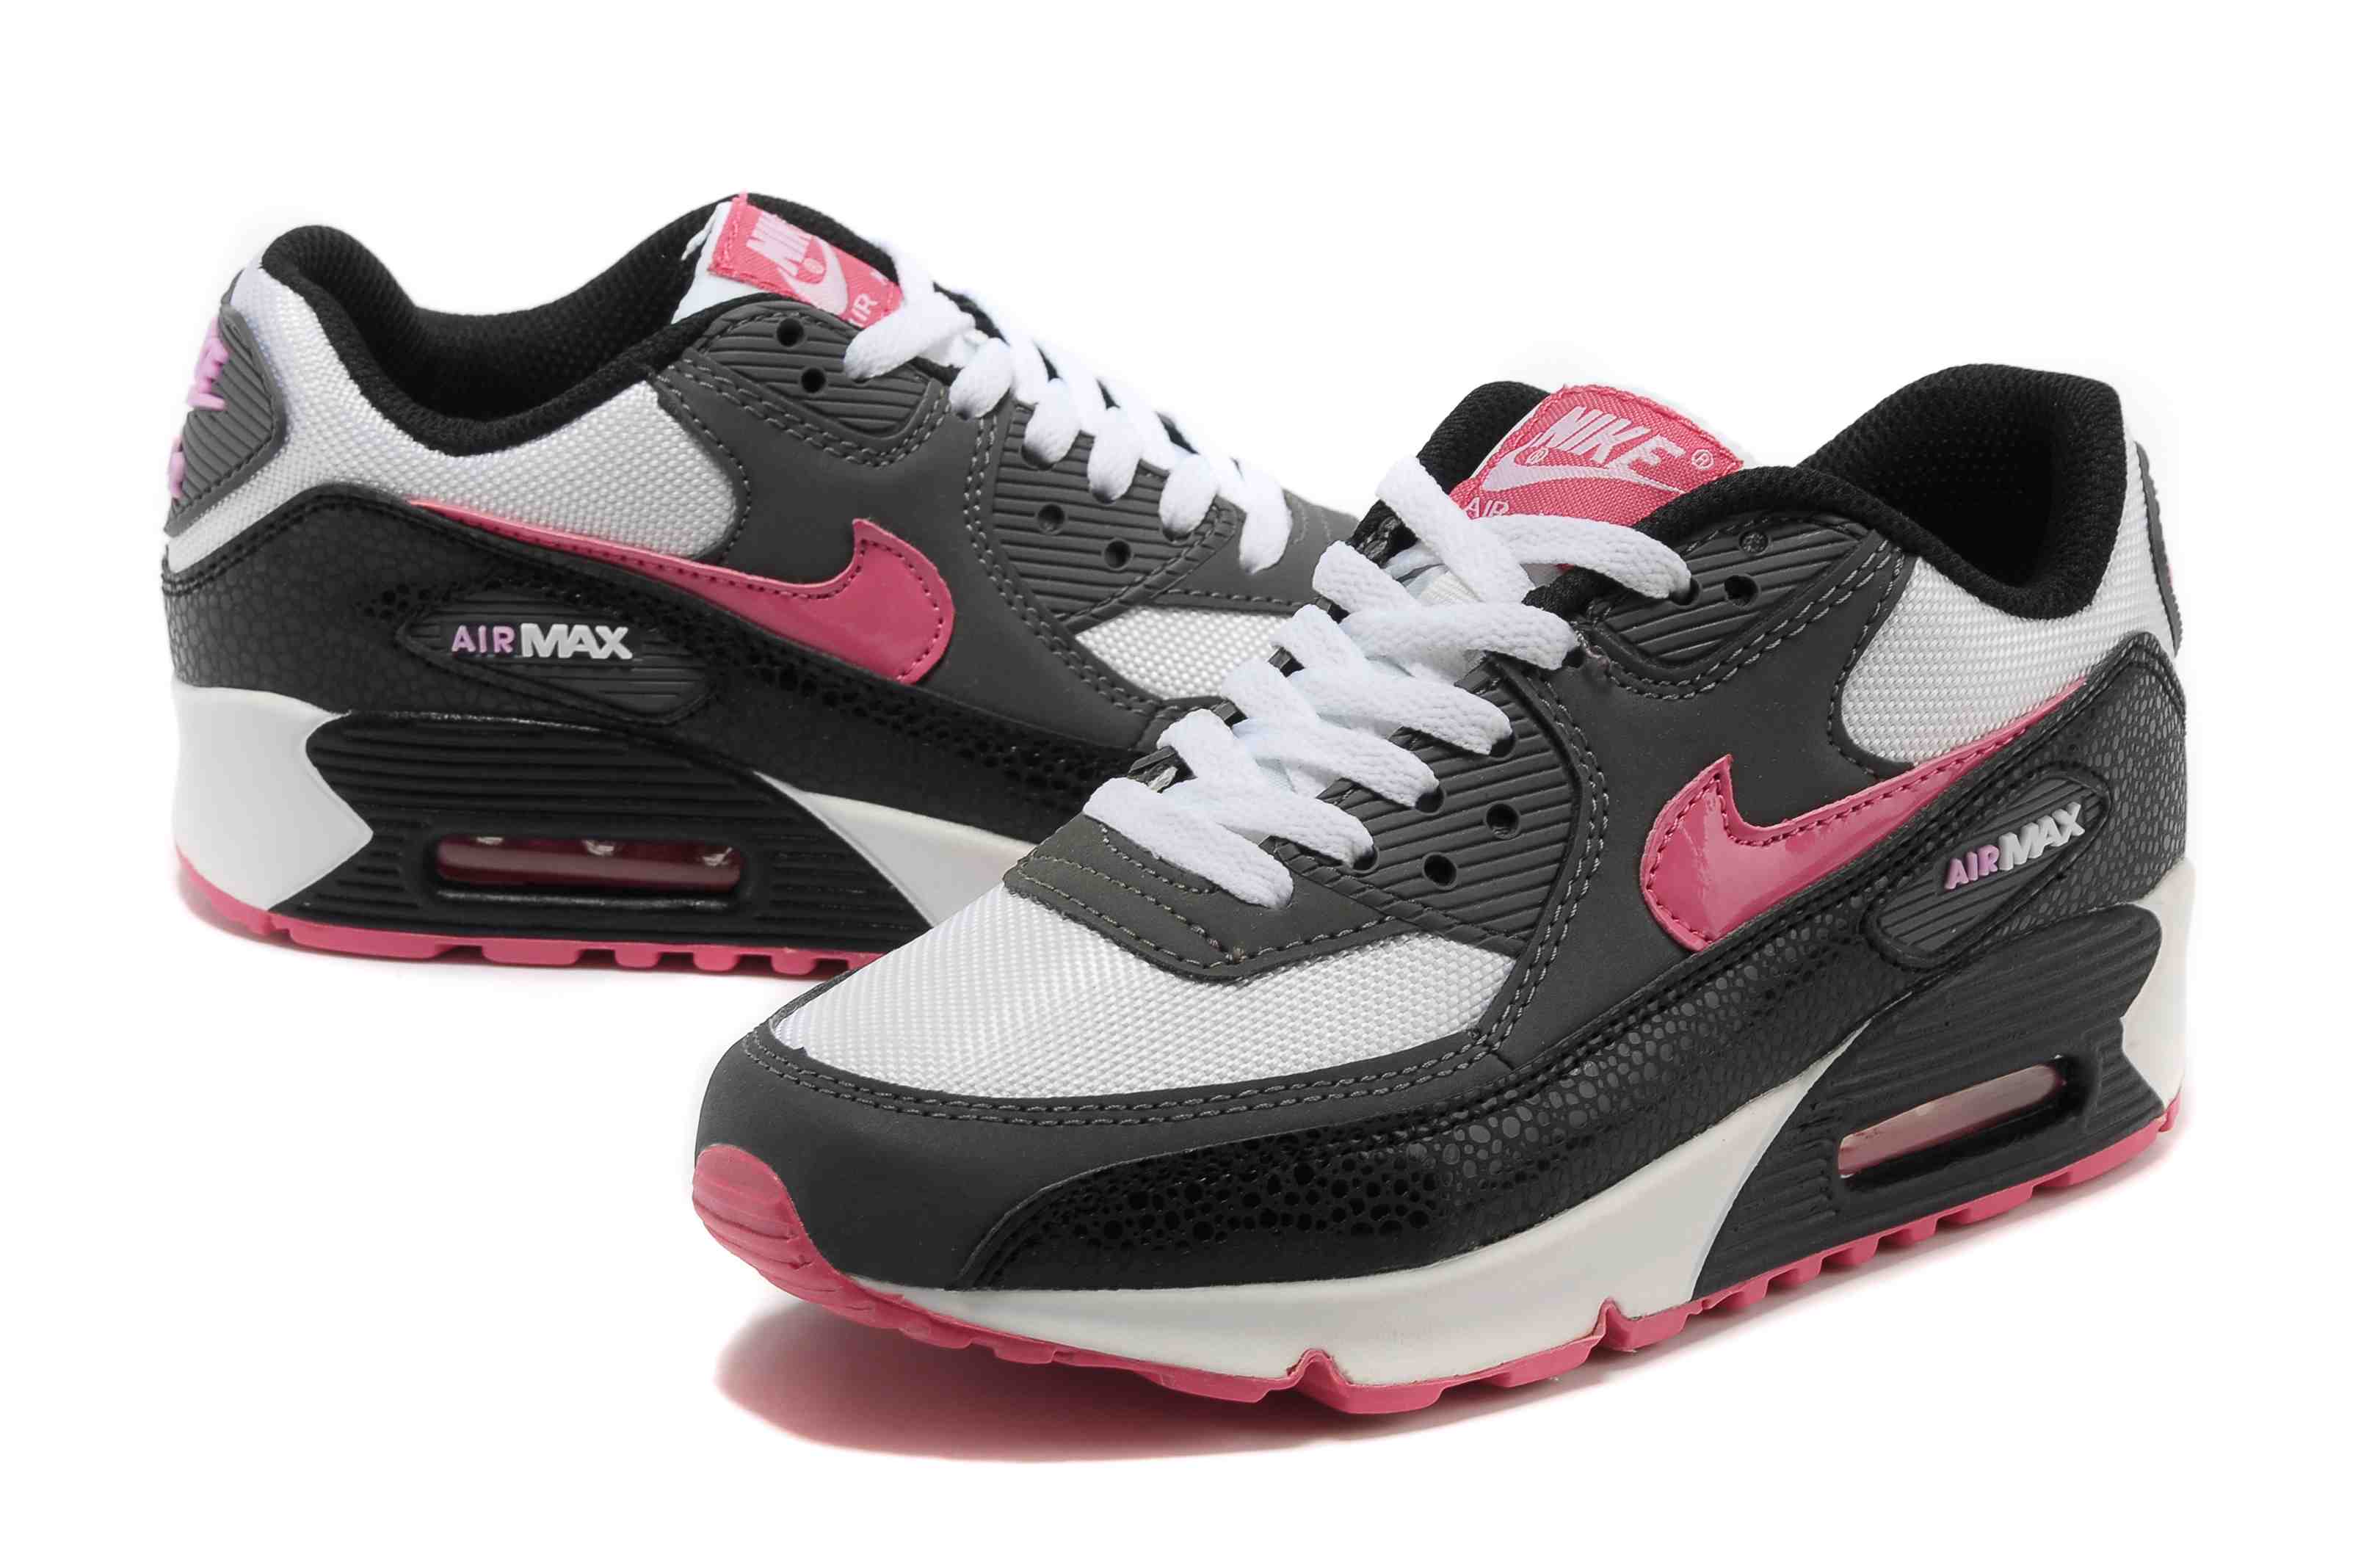 Nike Air Max Shoes Womens Black/Pink/White Online